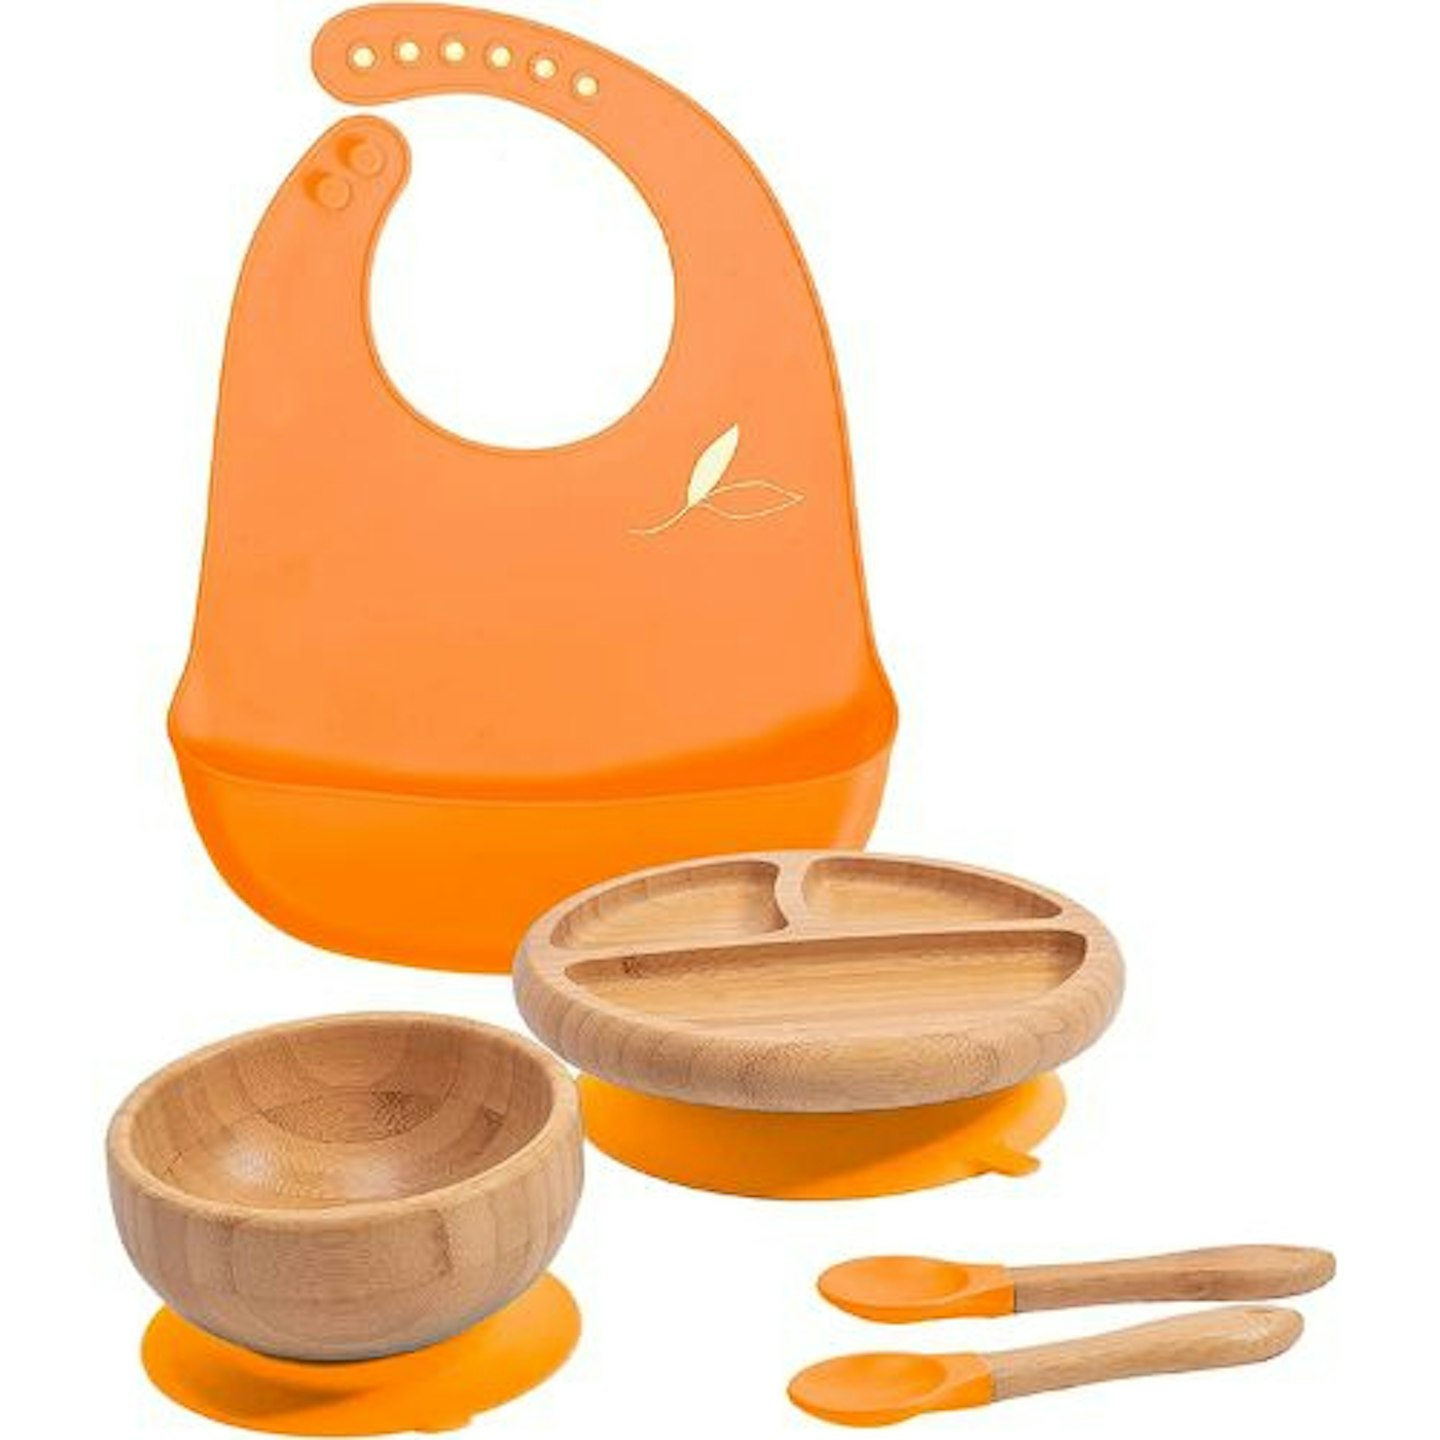 https://images.bauerhosting.com/affiliates/sites/12/motherandbaby/2022/08/Love-Earth-Bamboo-Baby-Plate-Weaning-Set.jpg?auto=format&w=1440&q=80